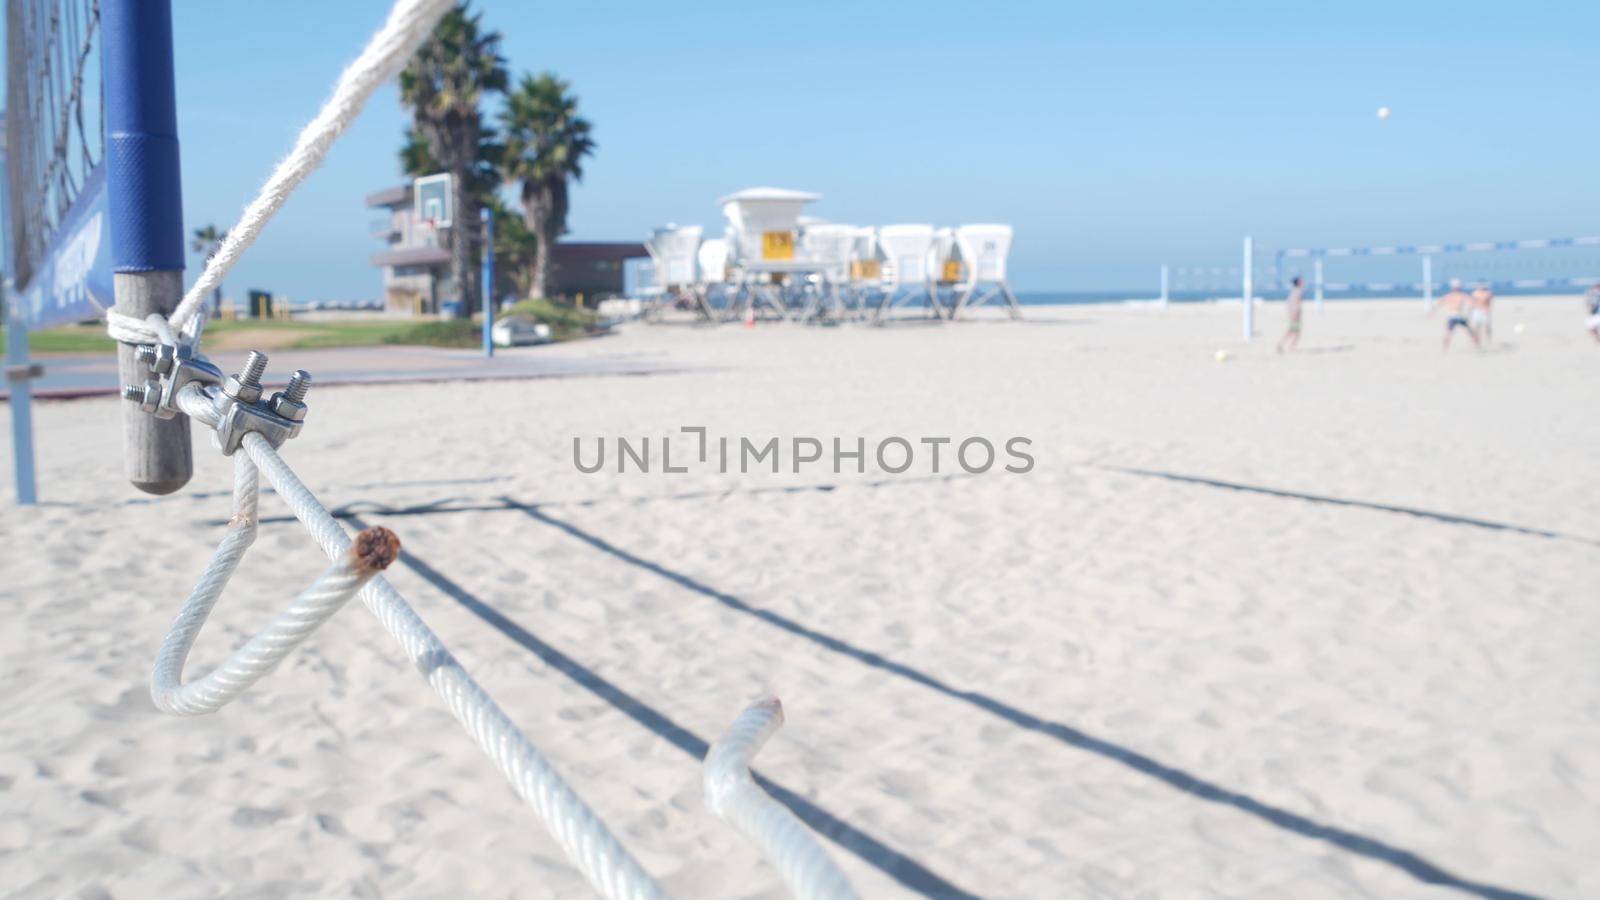 People playing volleyball on beach, lifeguard hut on California coast, USA. Palm trees and outdoor sport field, playground or court on sandy shore. recreational game with net and ball on Mission beach